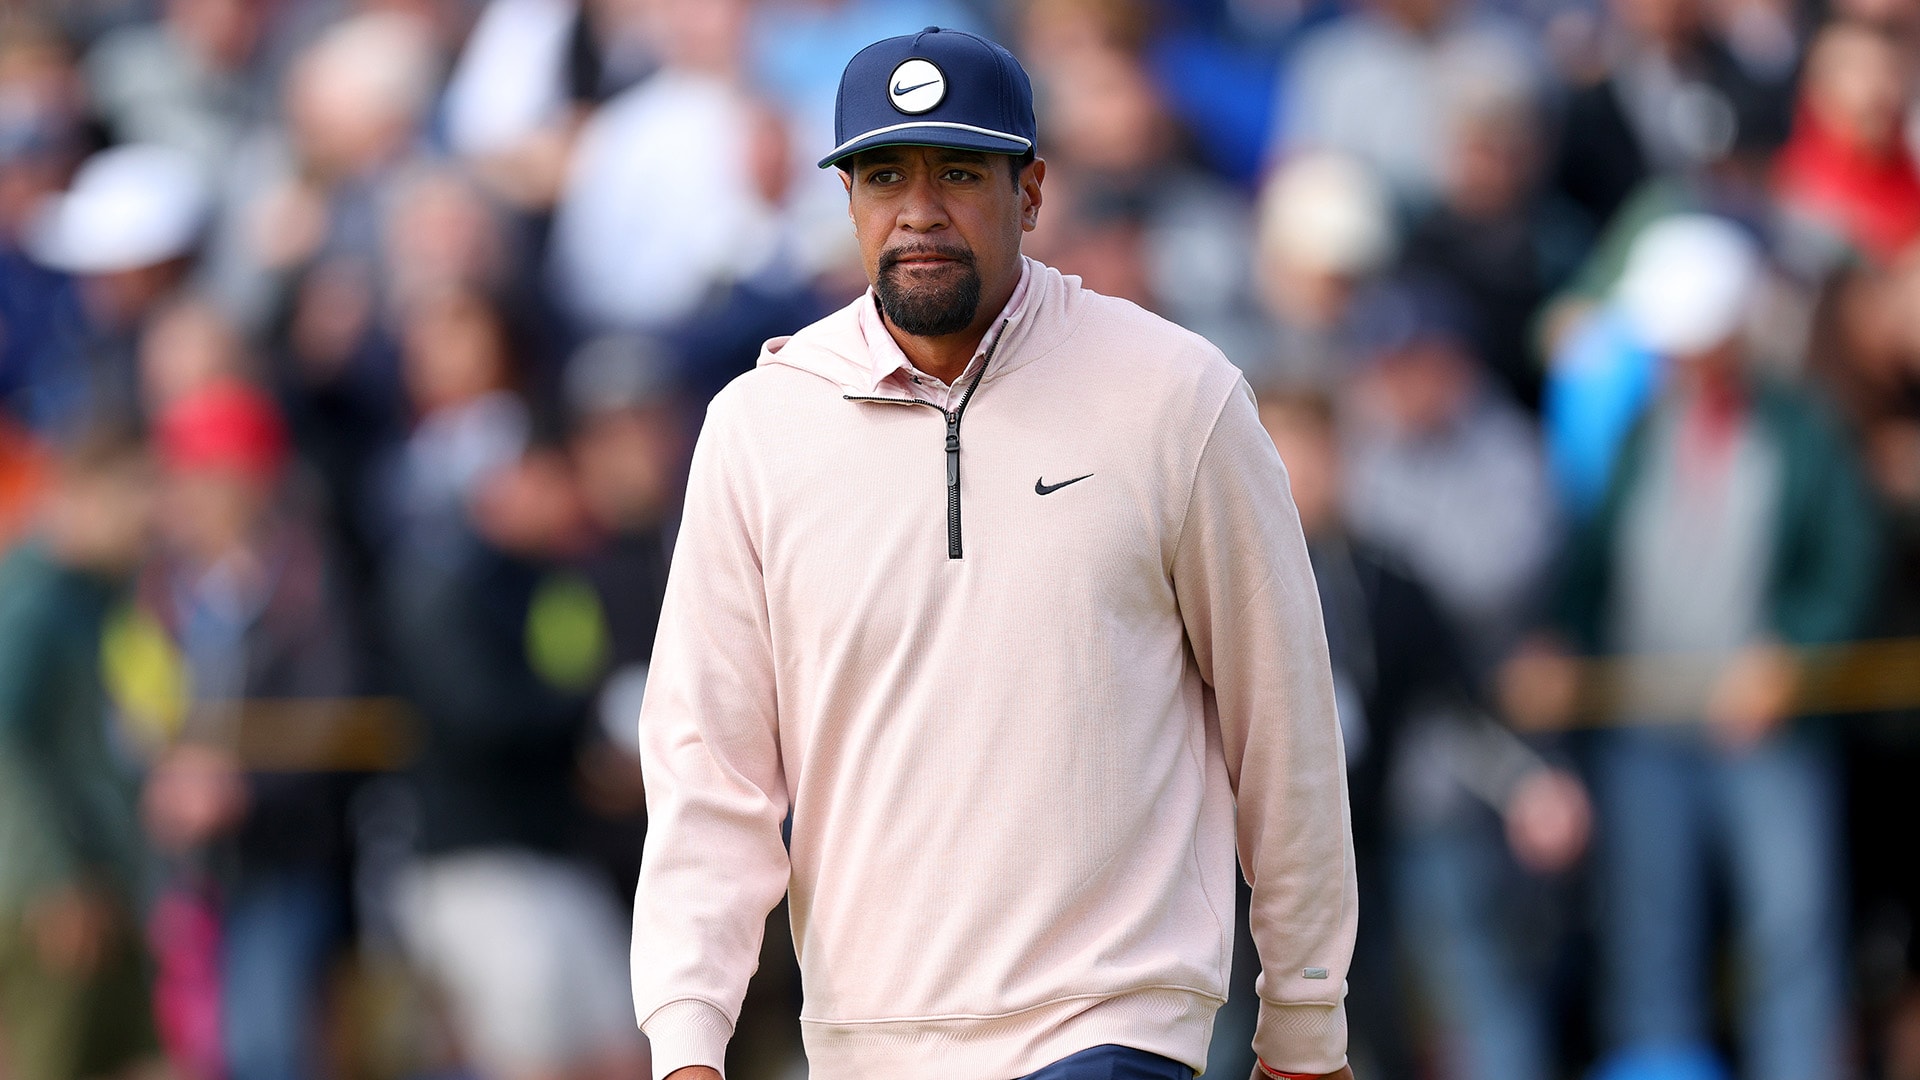 ‘Great thing … picks aren’t tomorrow’: Tony Finau begins 3M title defense with Ryder Cup on mind